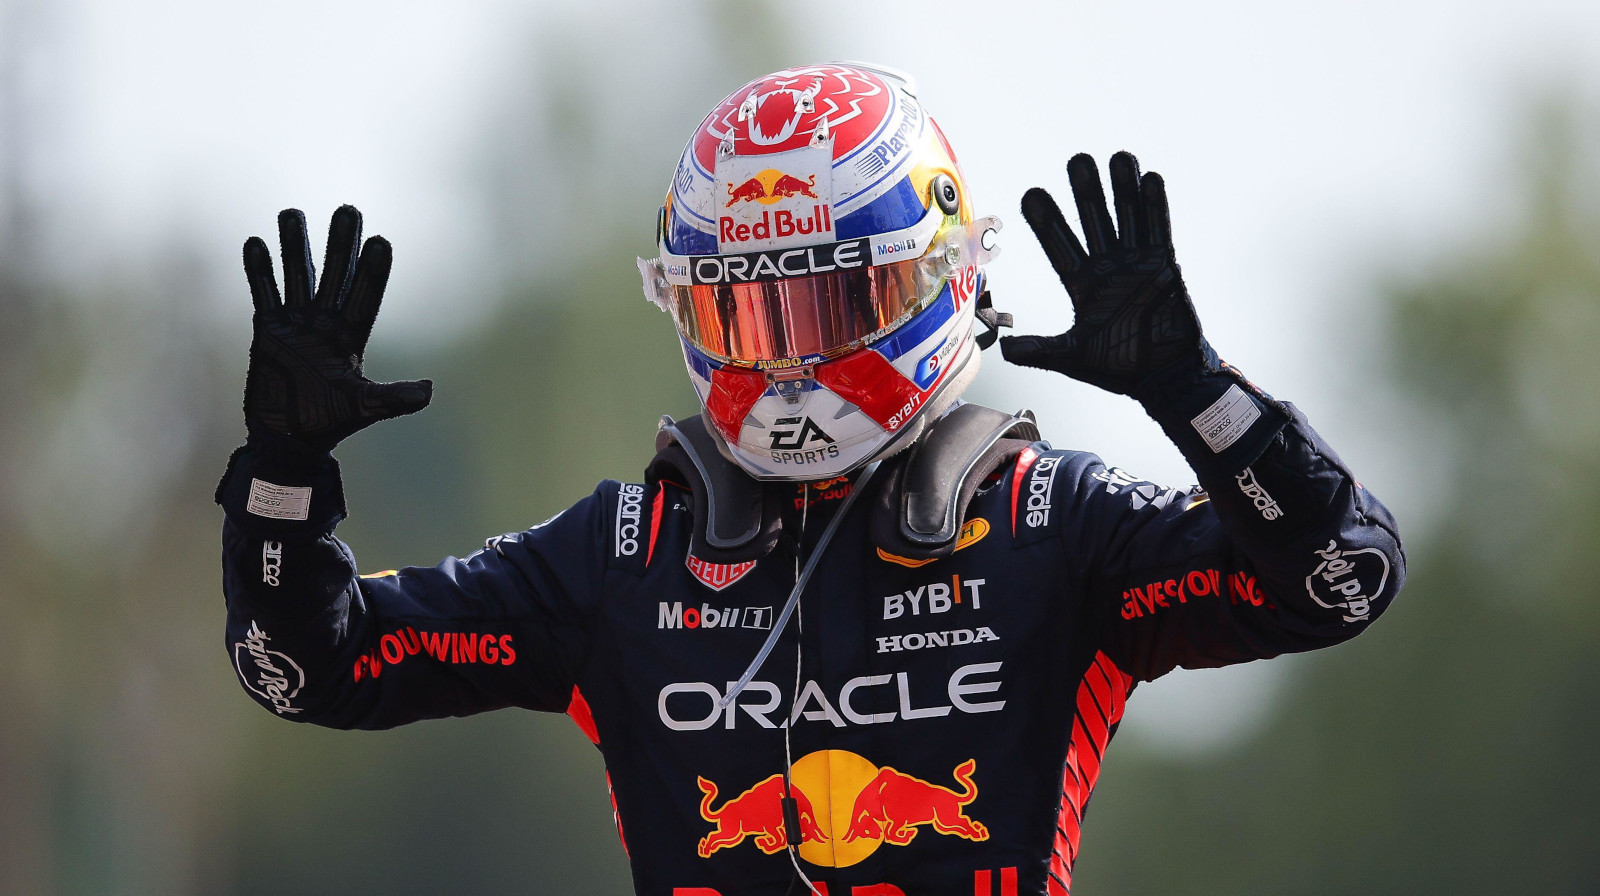 David Coulthard names key contenders to end era of Red Bull and Max